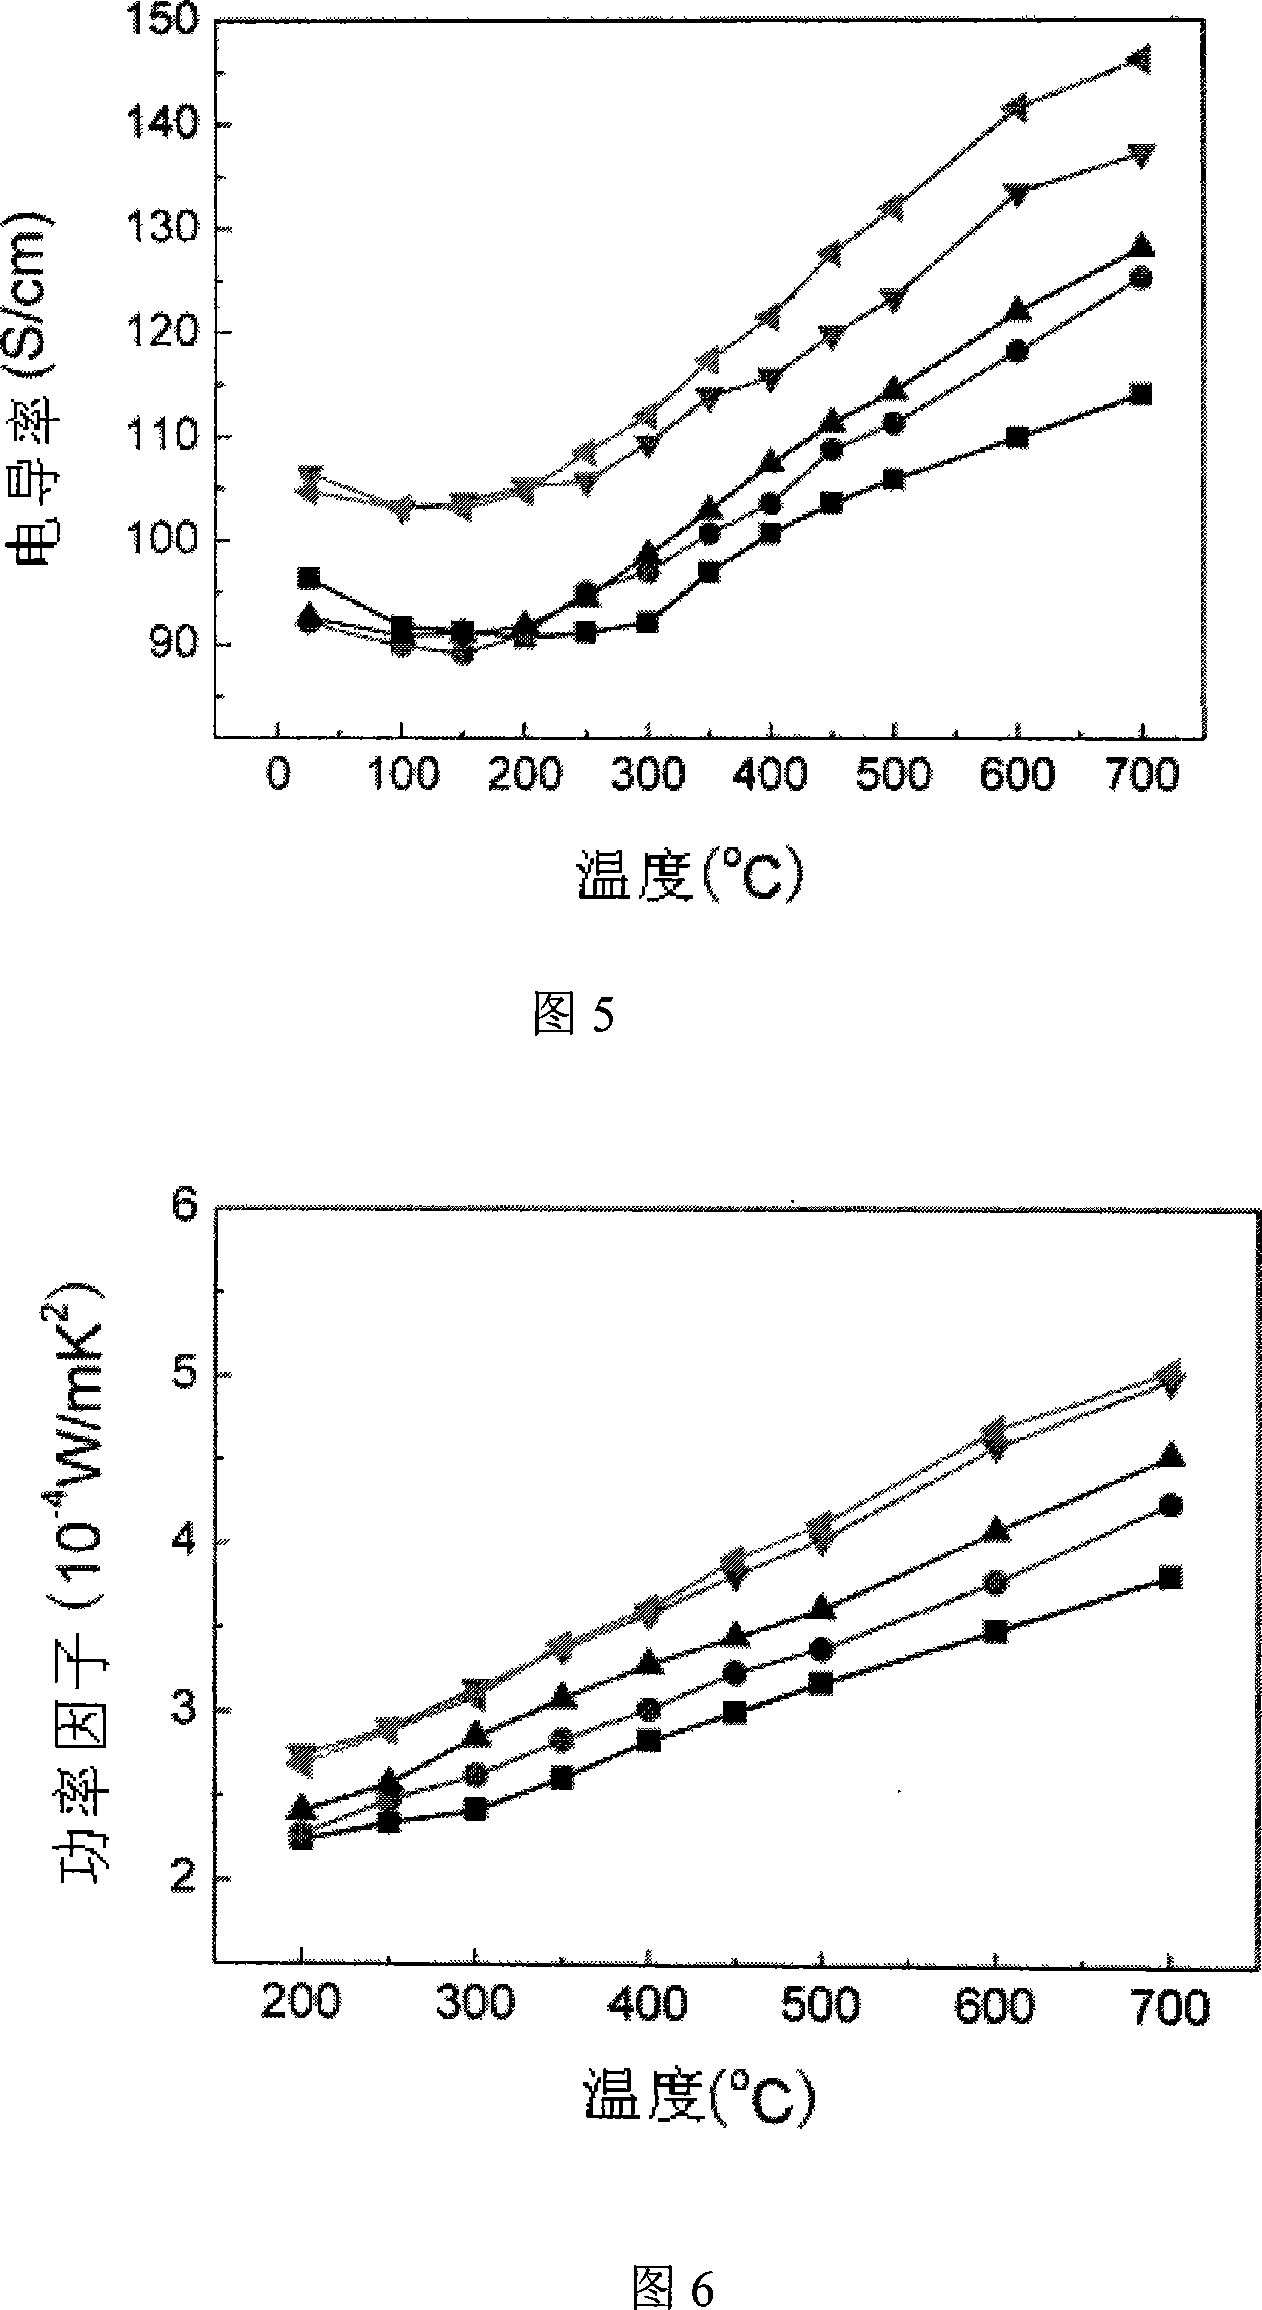 Method for preparing pyroelectric material Ag complex (Ca***La*)*Co*O